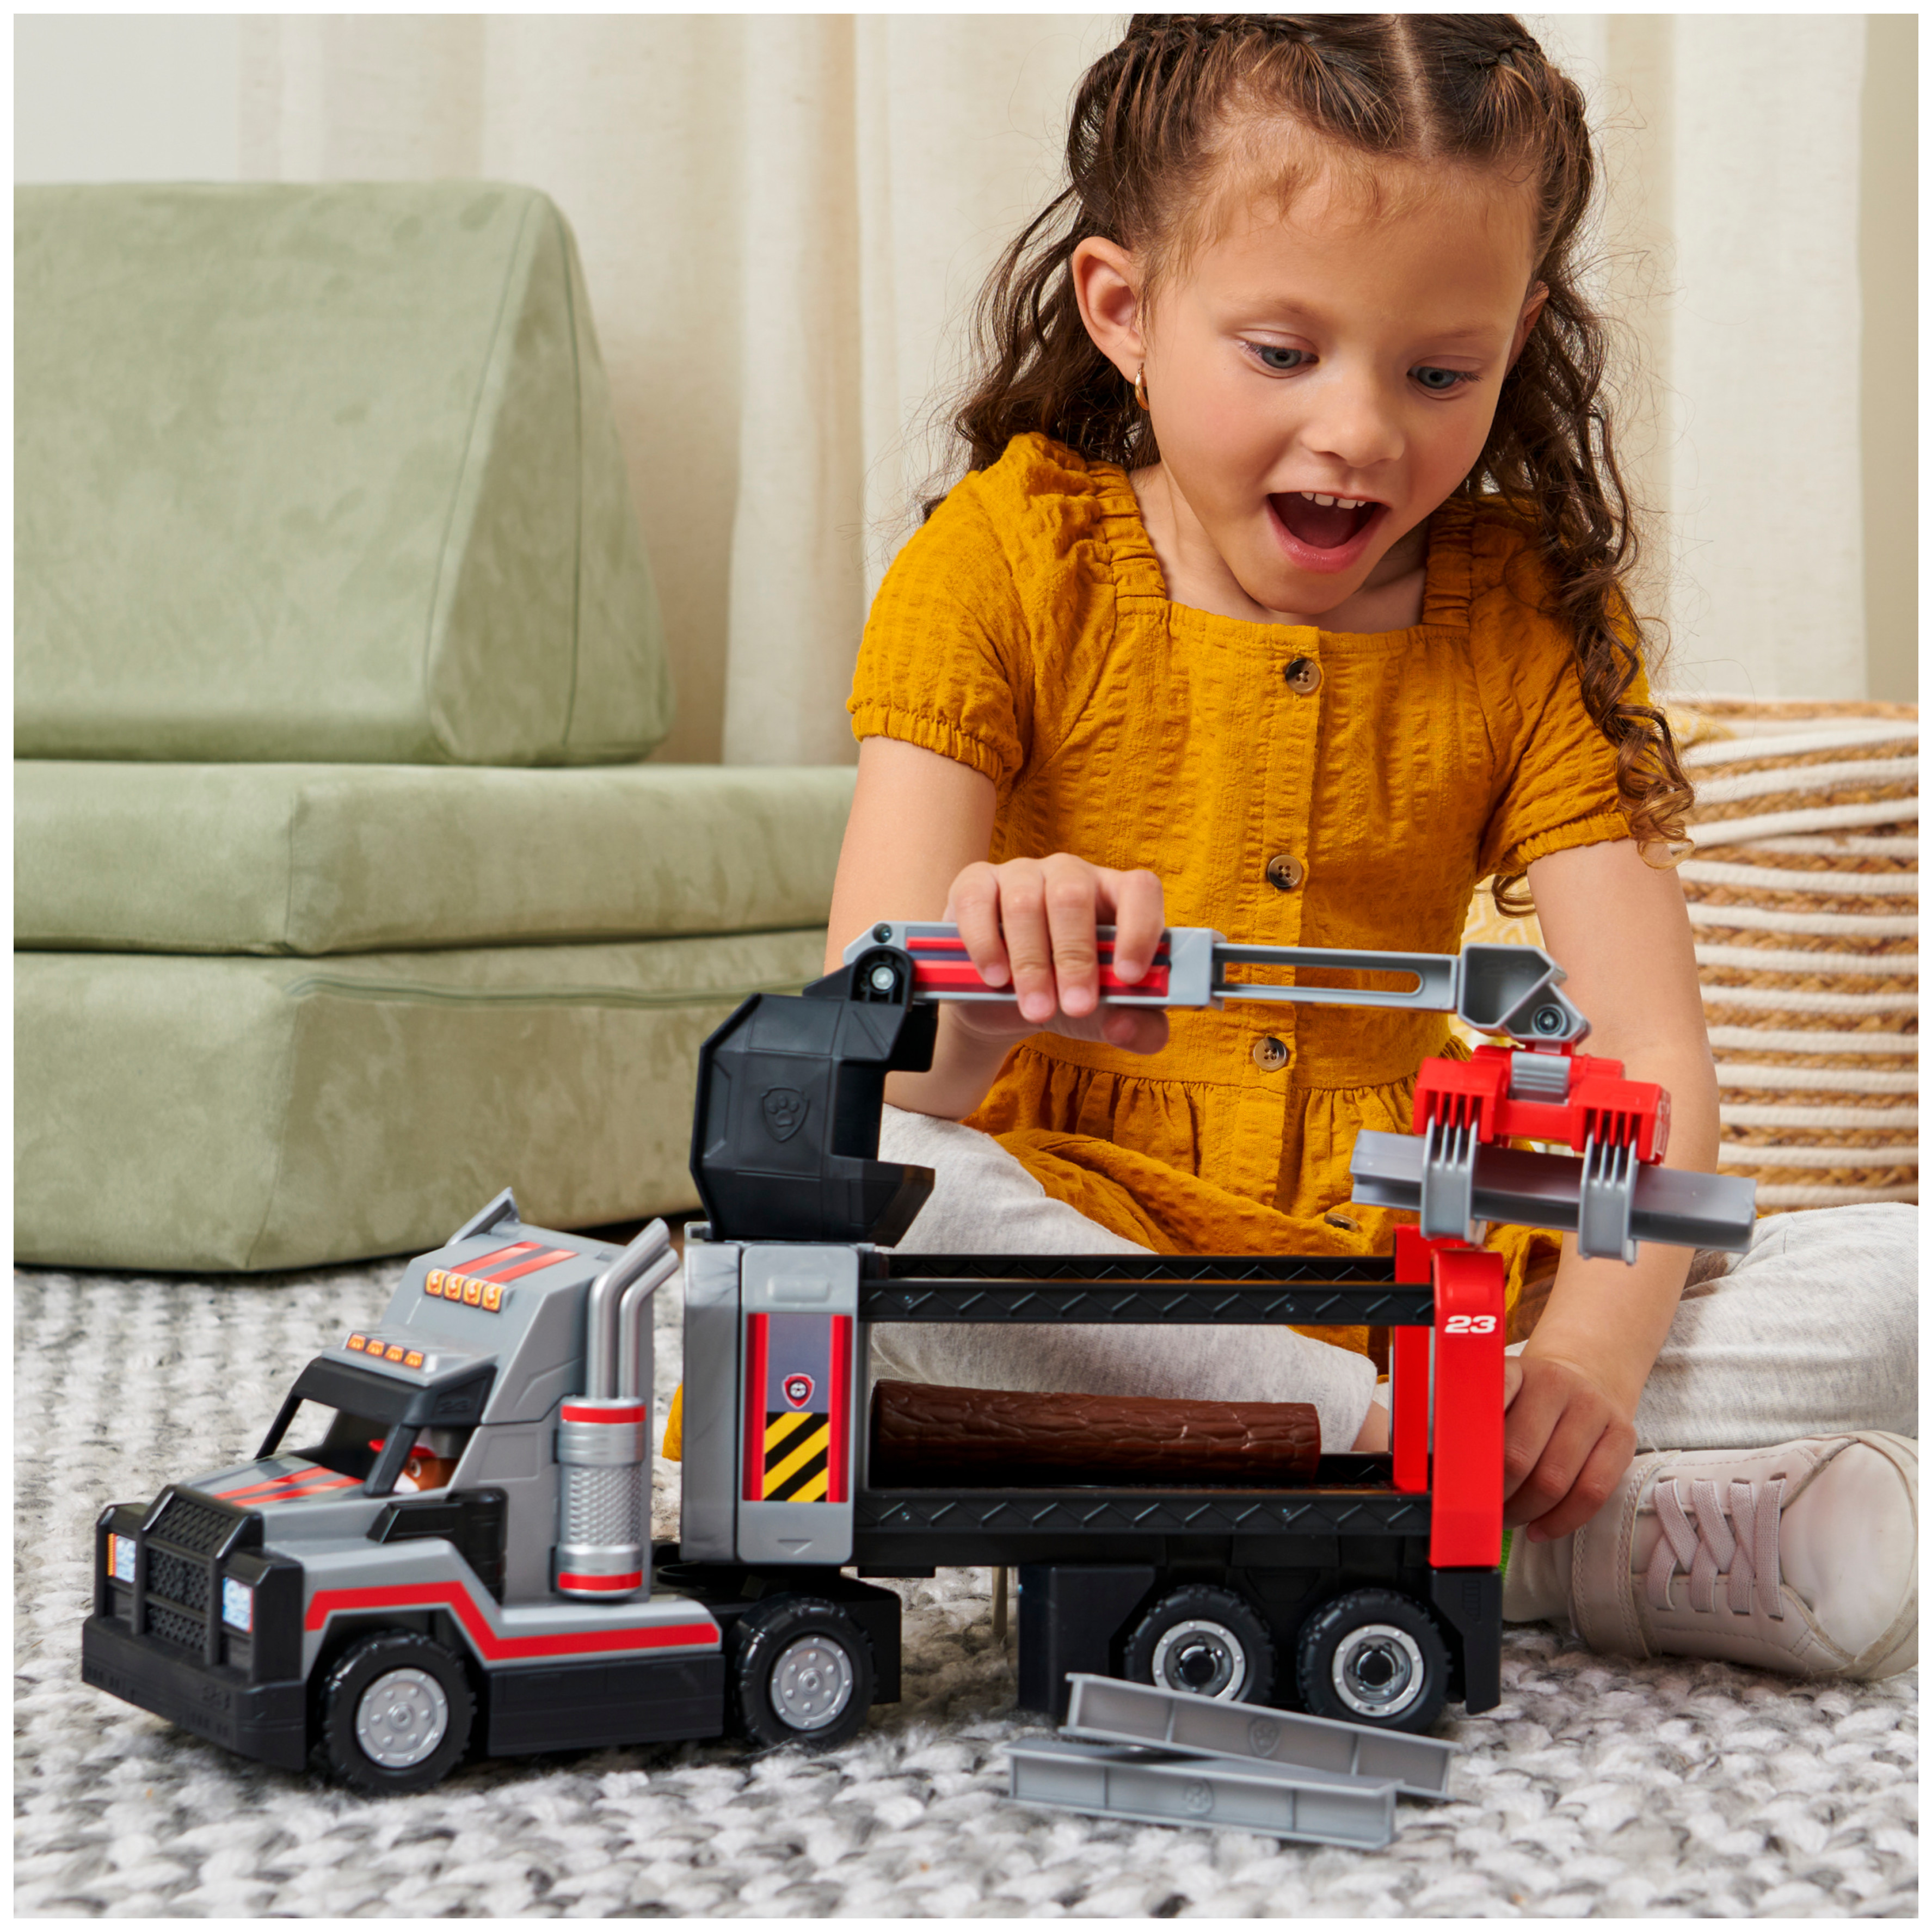 PAW Patrol, Al’s Deluxe Big Truck Toy with Moveable Claw Arm and Accessories - image 3 of 8